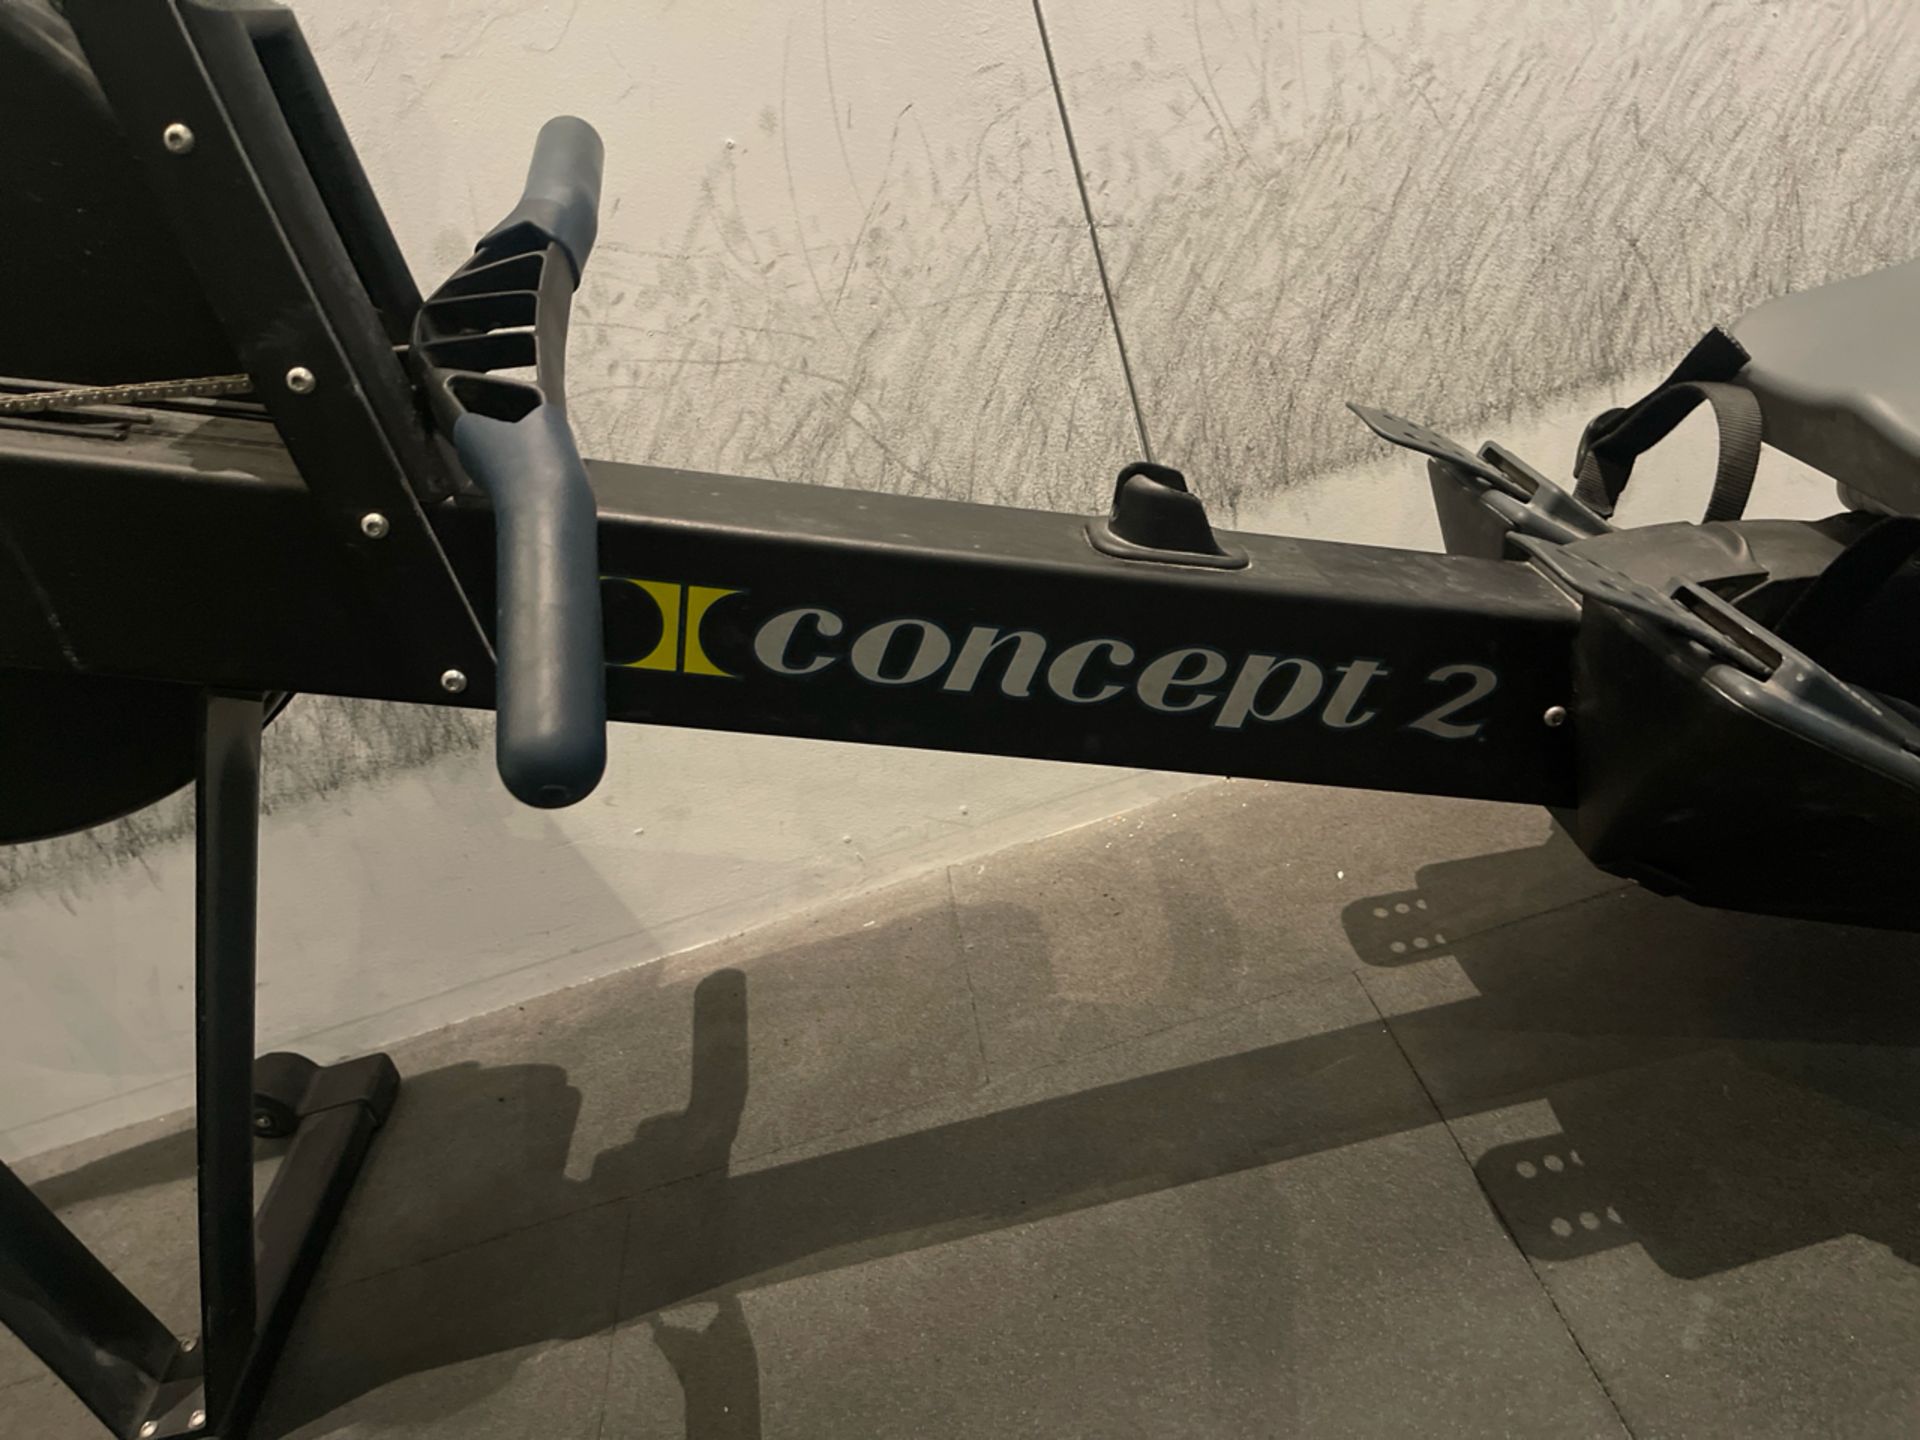 Concept 2 Rower - Image 2 of 9